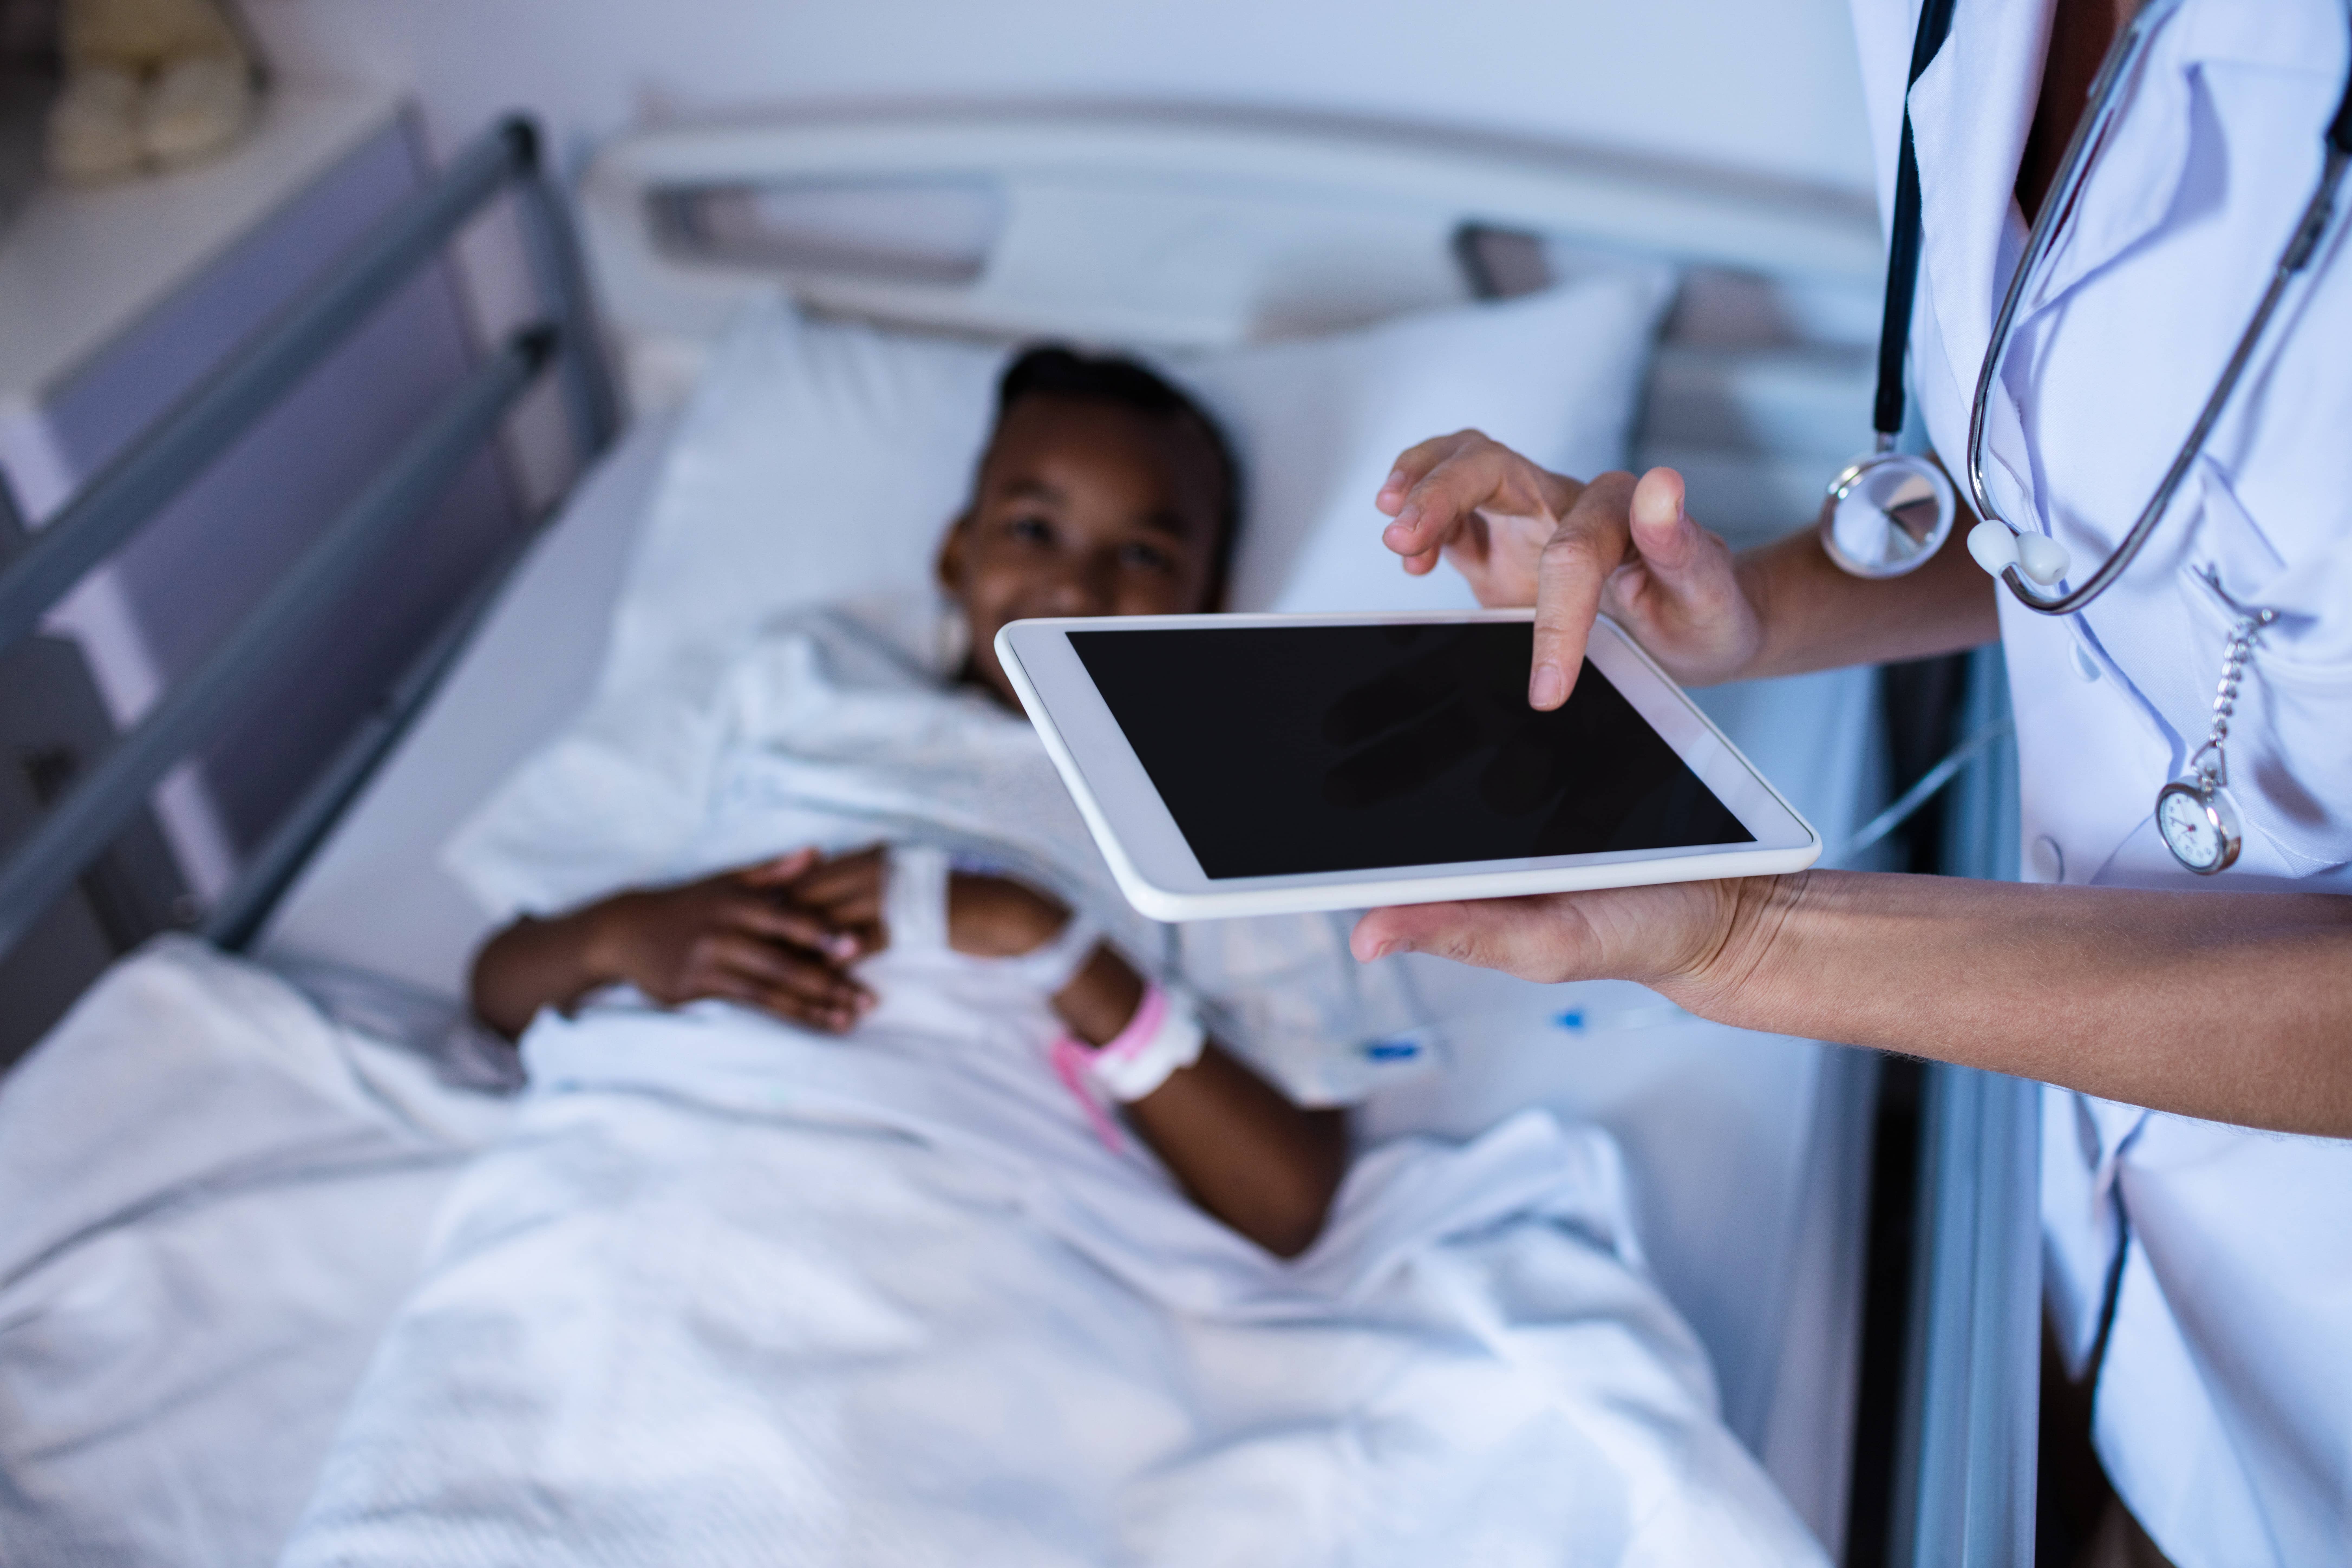 A black girl is lying down in hospital bed. At her side, there is a nurse typing on a tablet.